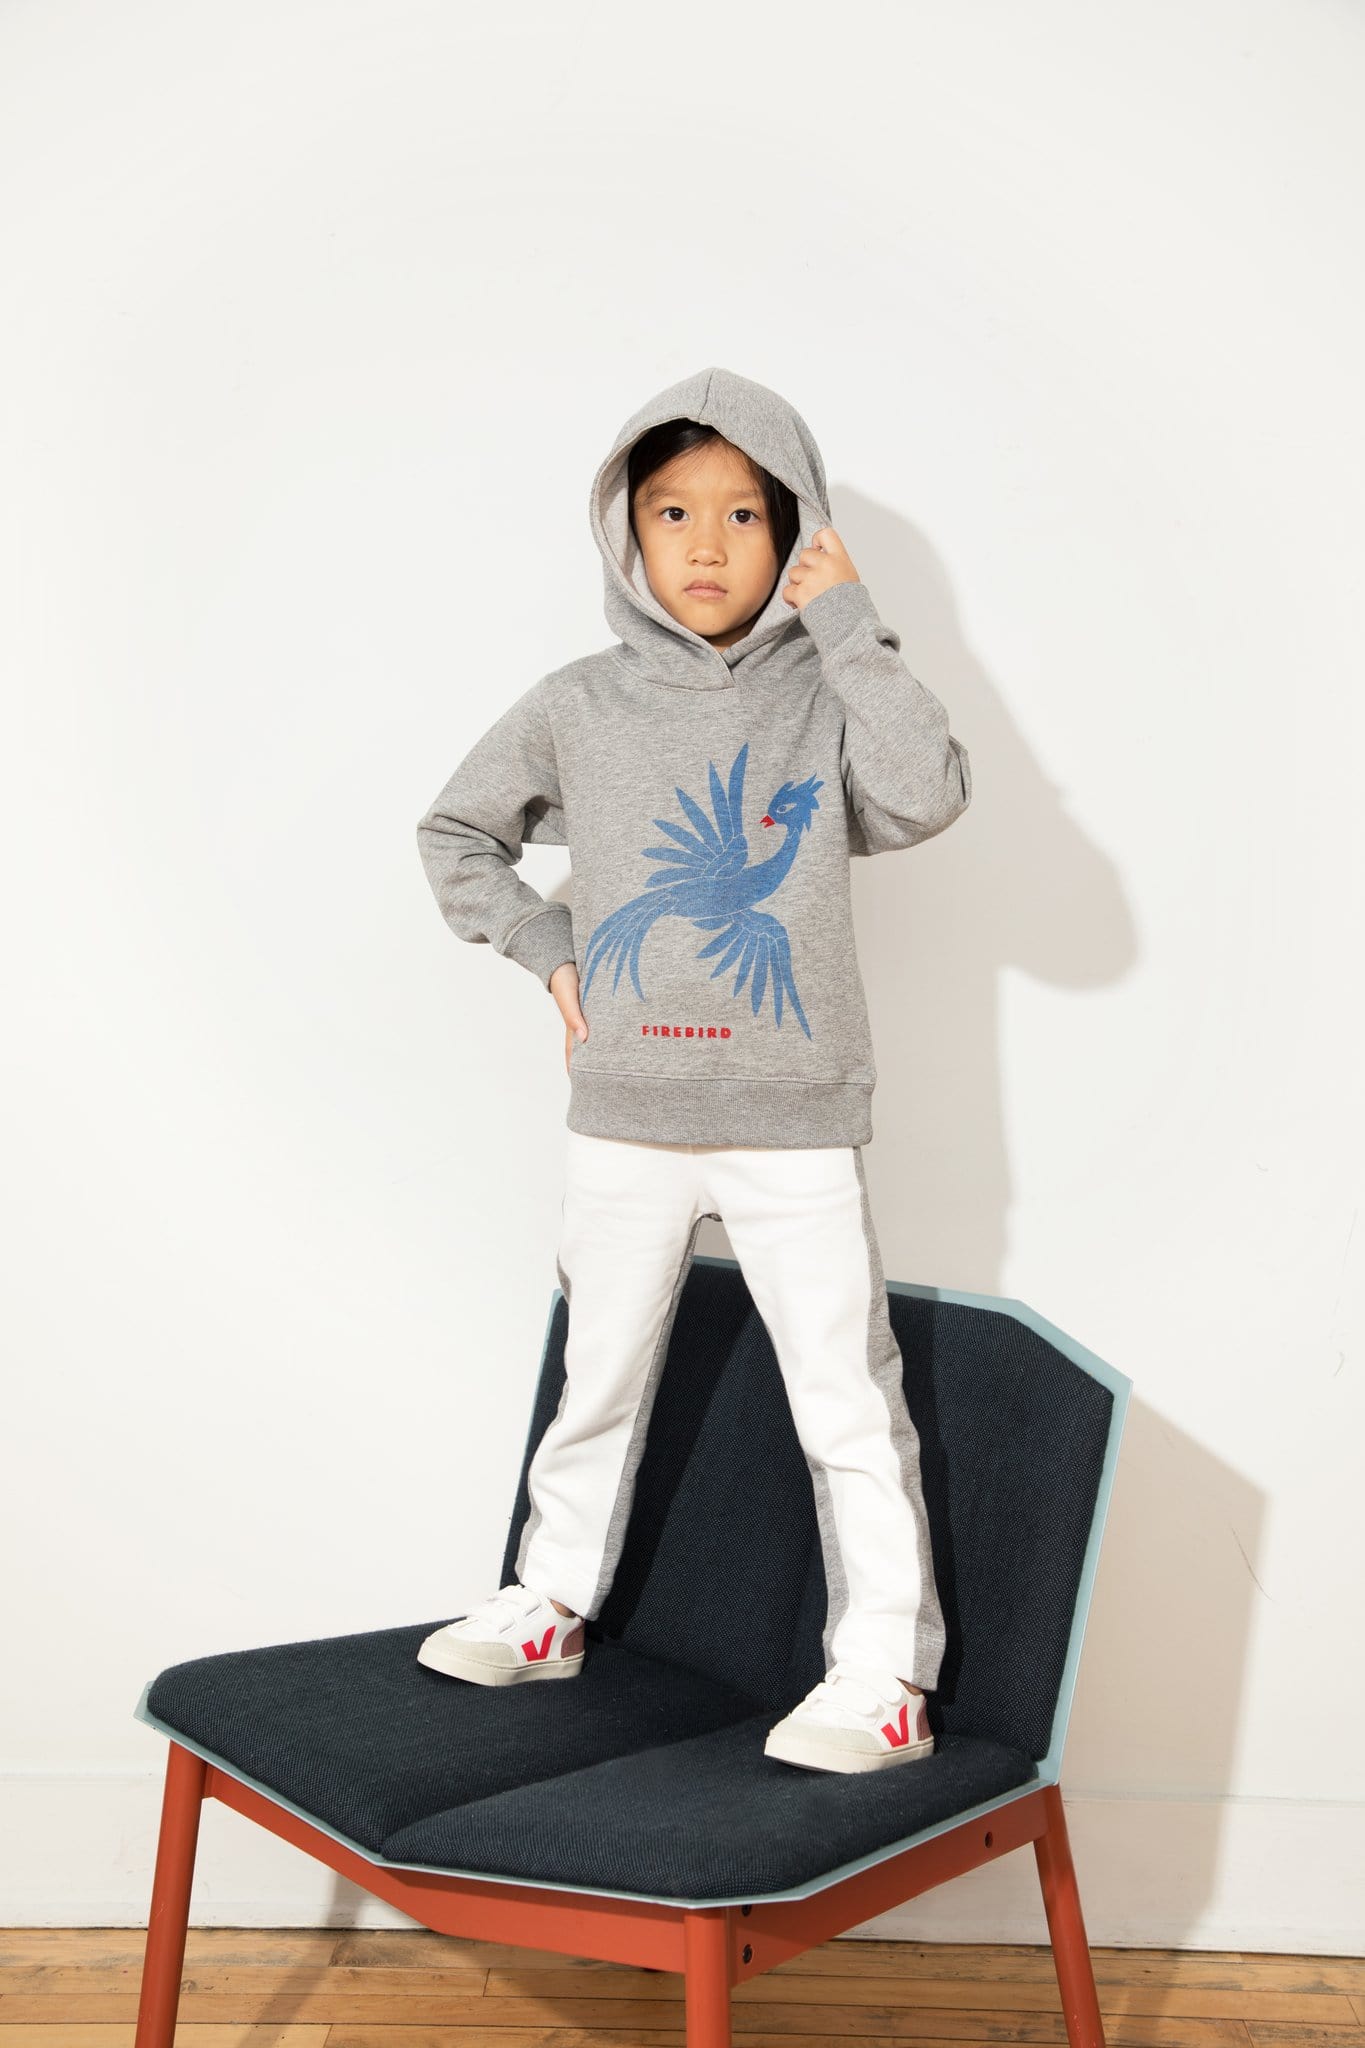 Kids pants and graphic hoodie. Organic cotton fleece. Heather grey / white colors. Unisex. Made in the US (LA).